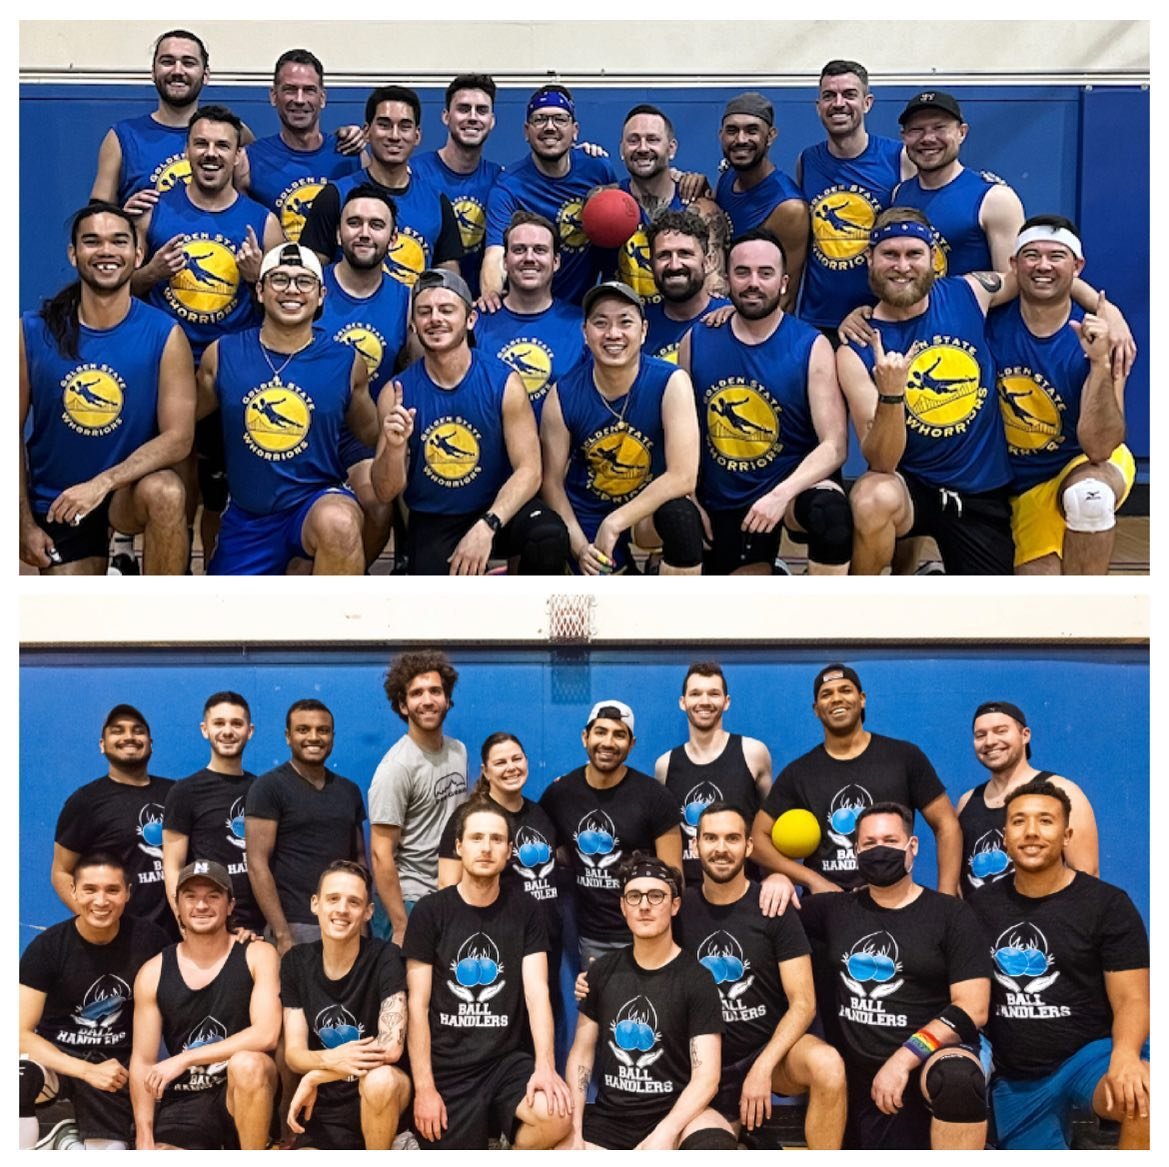 Congrats to our dodgeball champs!
🥇Division A: Golden State Whorriors
🥇Division B: Ball Handlers

Join us for a final medals mixer at @hitopssf on Thursday (11/2) at 7pm!